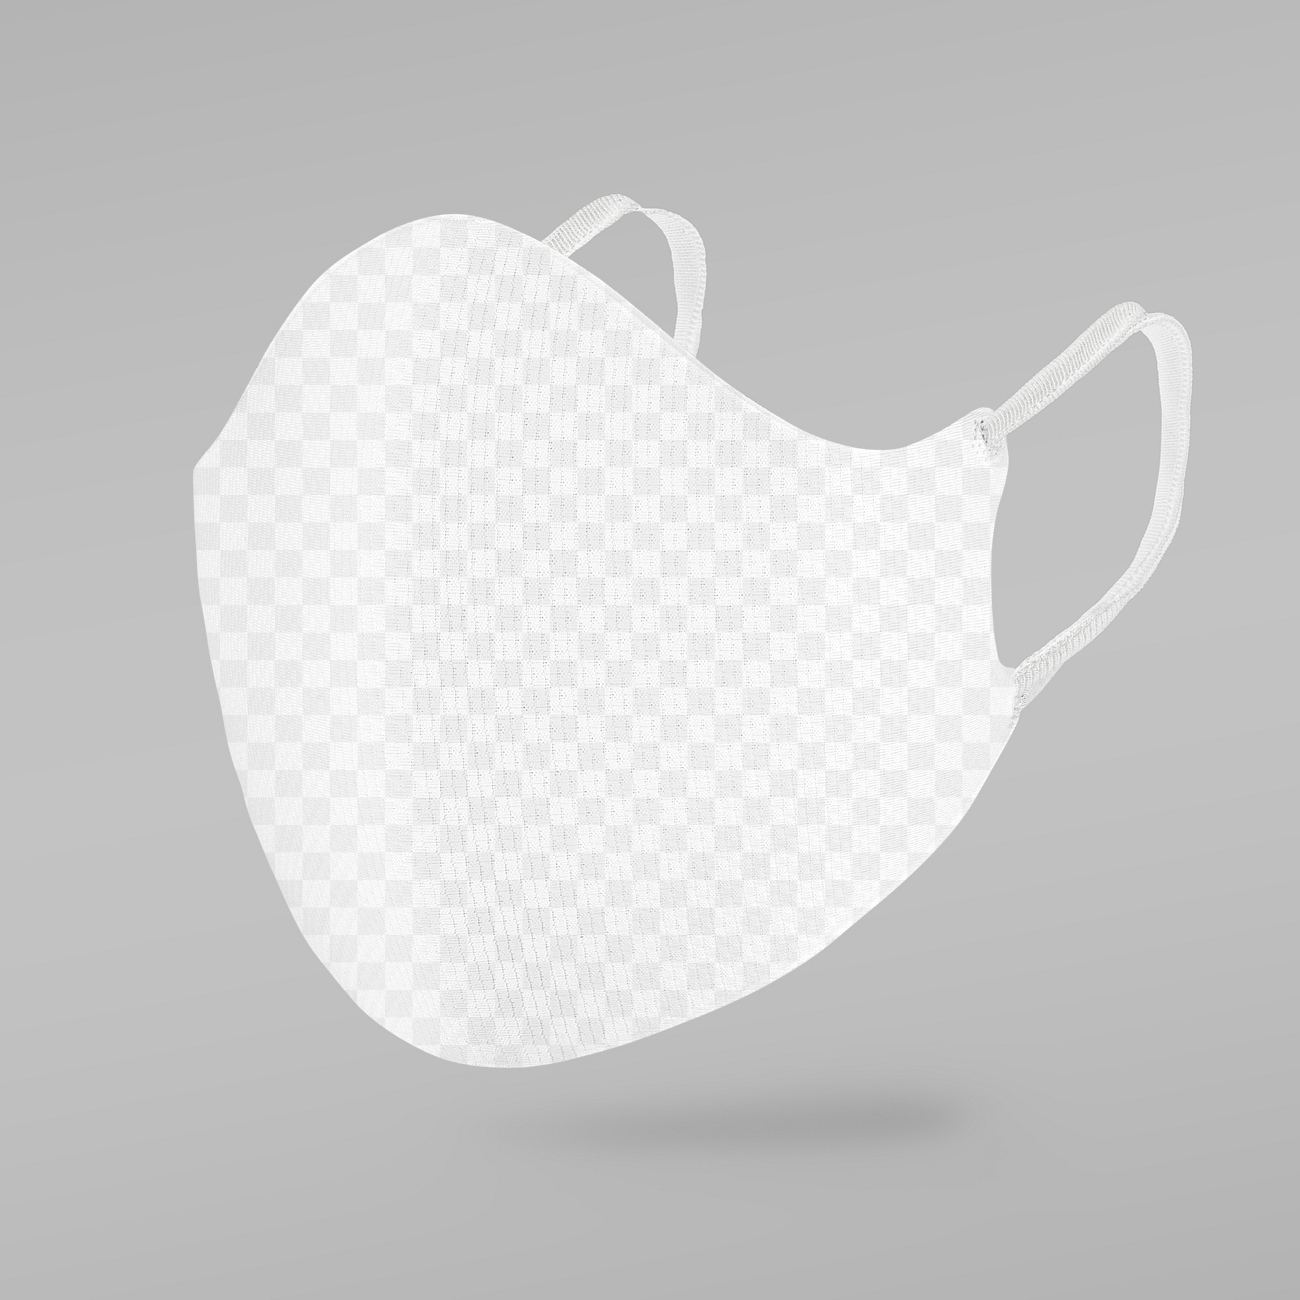 Download Free royalty image about Fabric face mask mockup